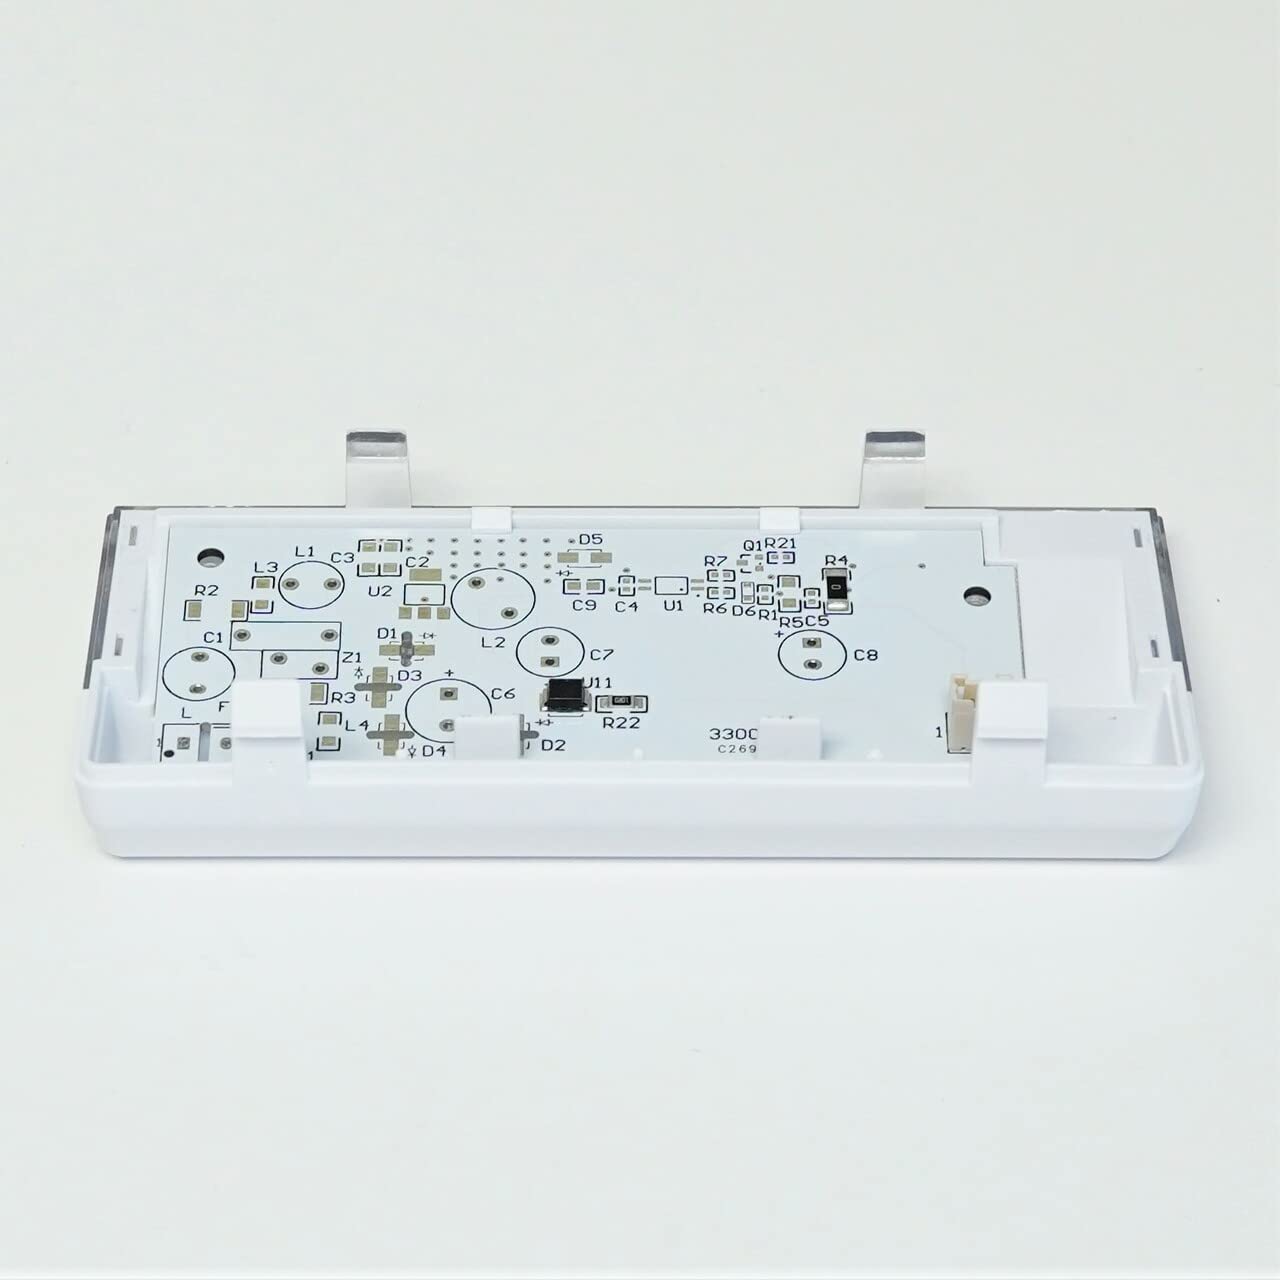 W10515057 LED Light Module Assembly with Case for Whirlpool, Kenmore or Maytag Washers